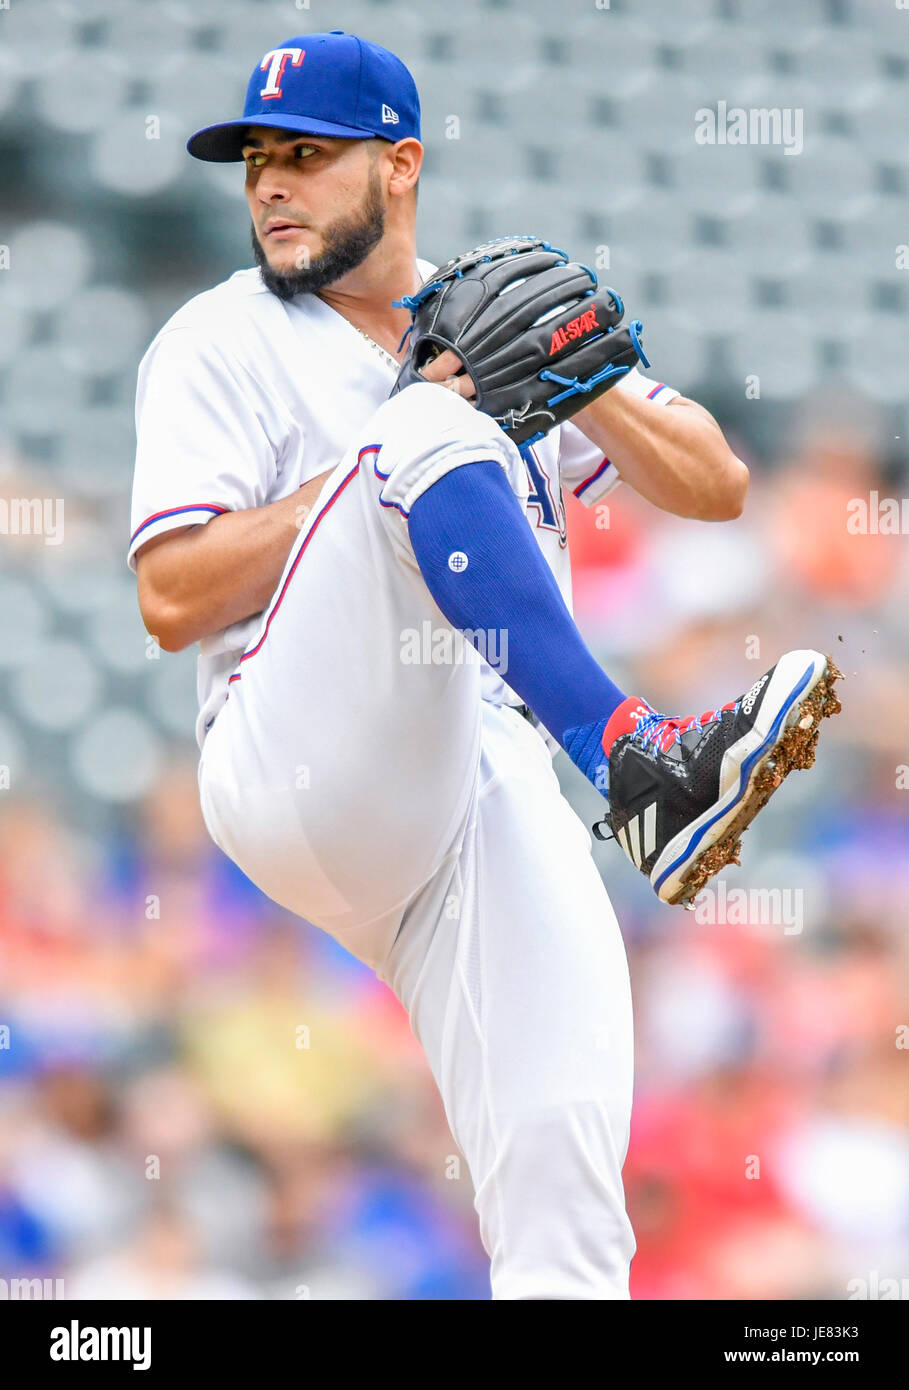 Jun 22, 2017: Texas Rangers starting pitcher Martin Perez #33 pitched 6  innings and gave up 4 runs during an MLB game between the Toronto Blue Jays  and the Texas Rangers at